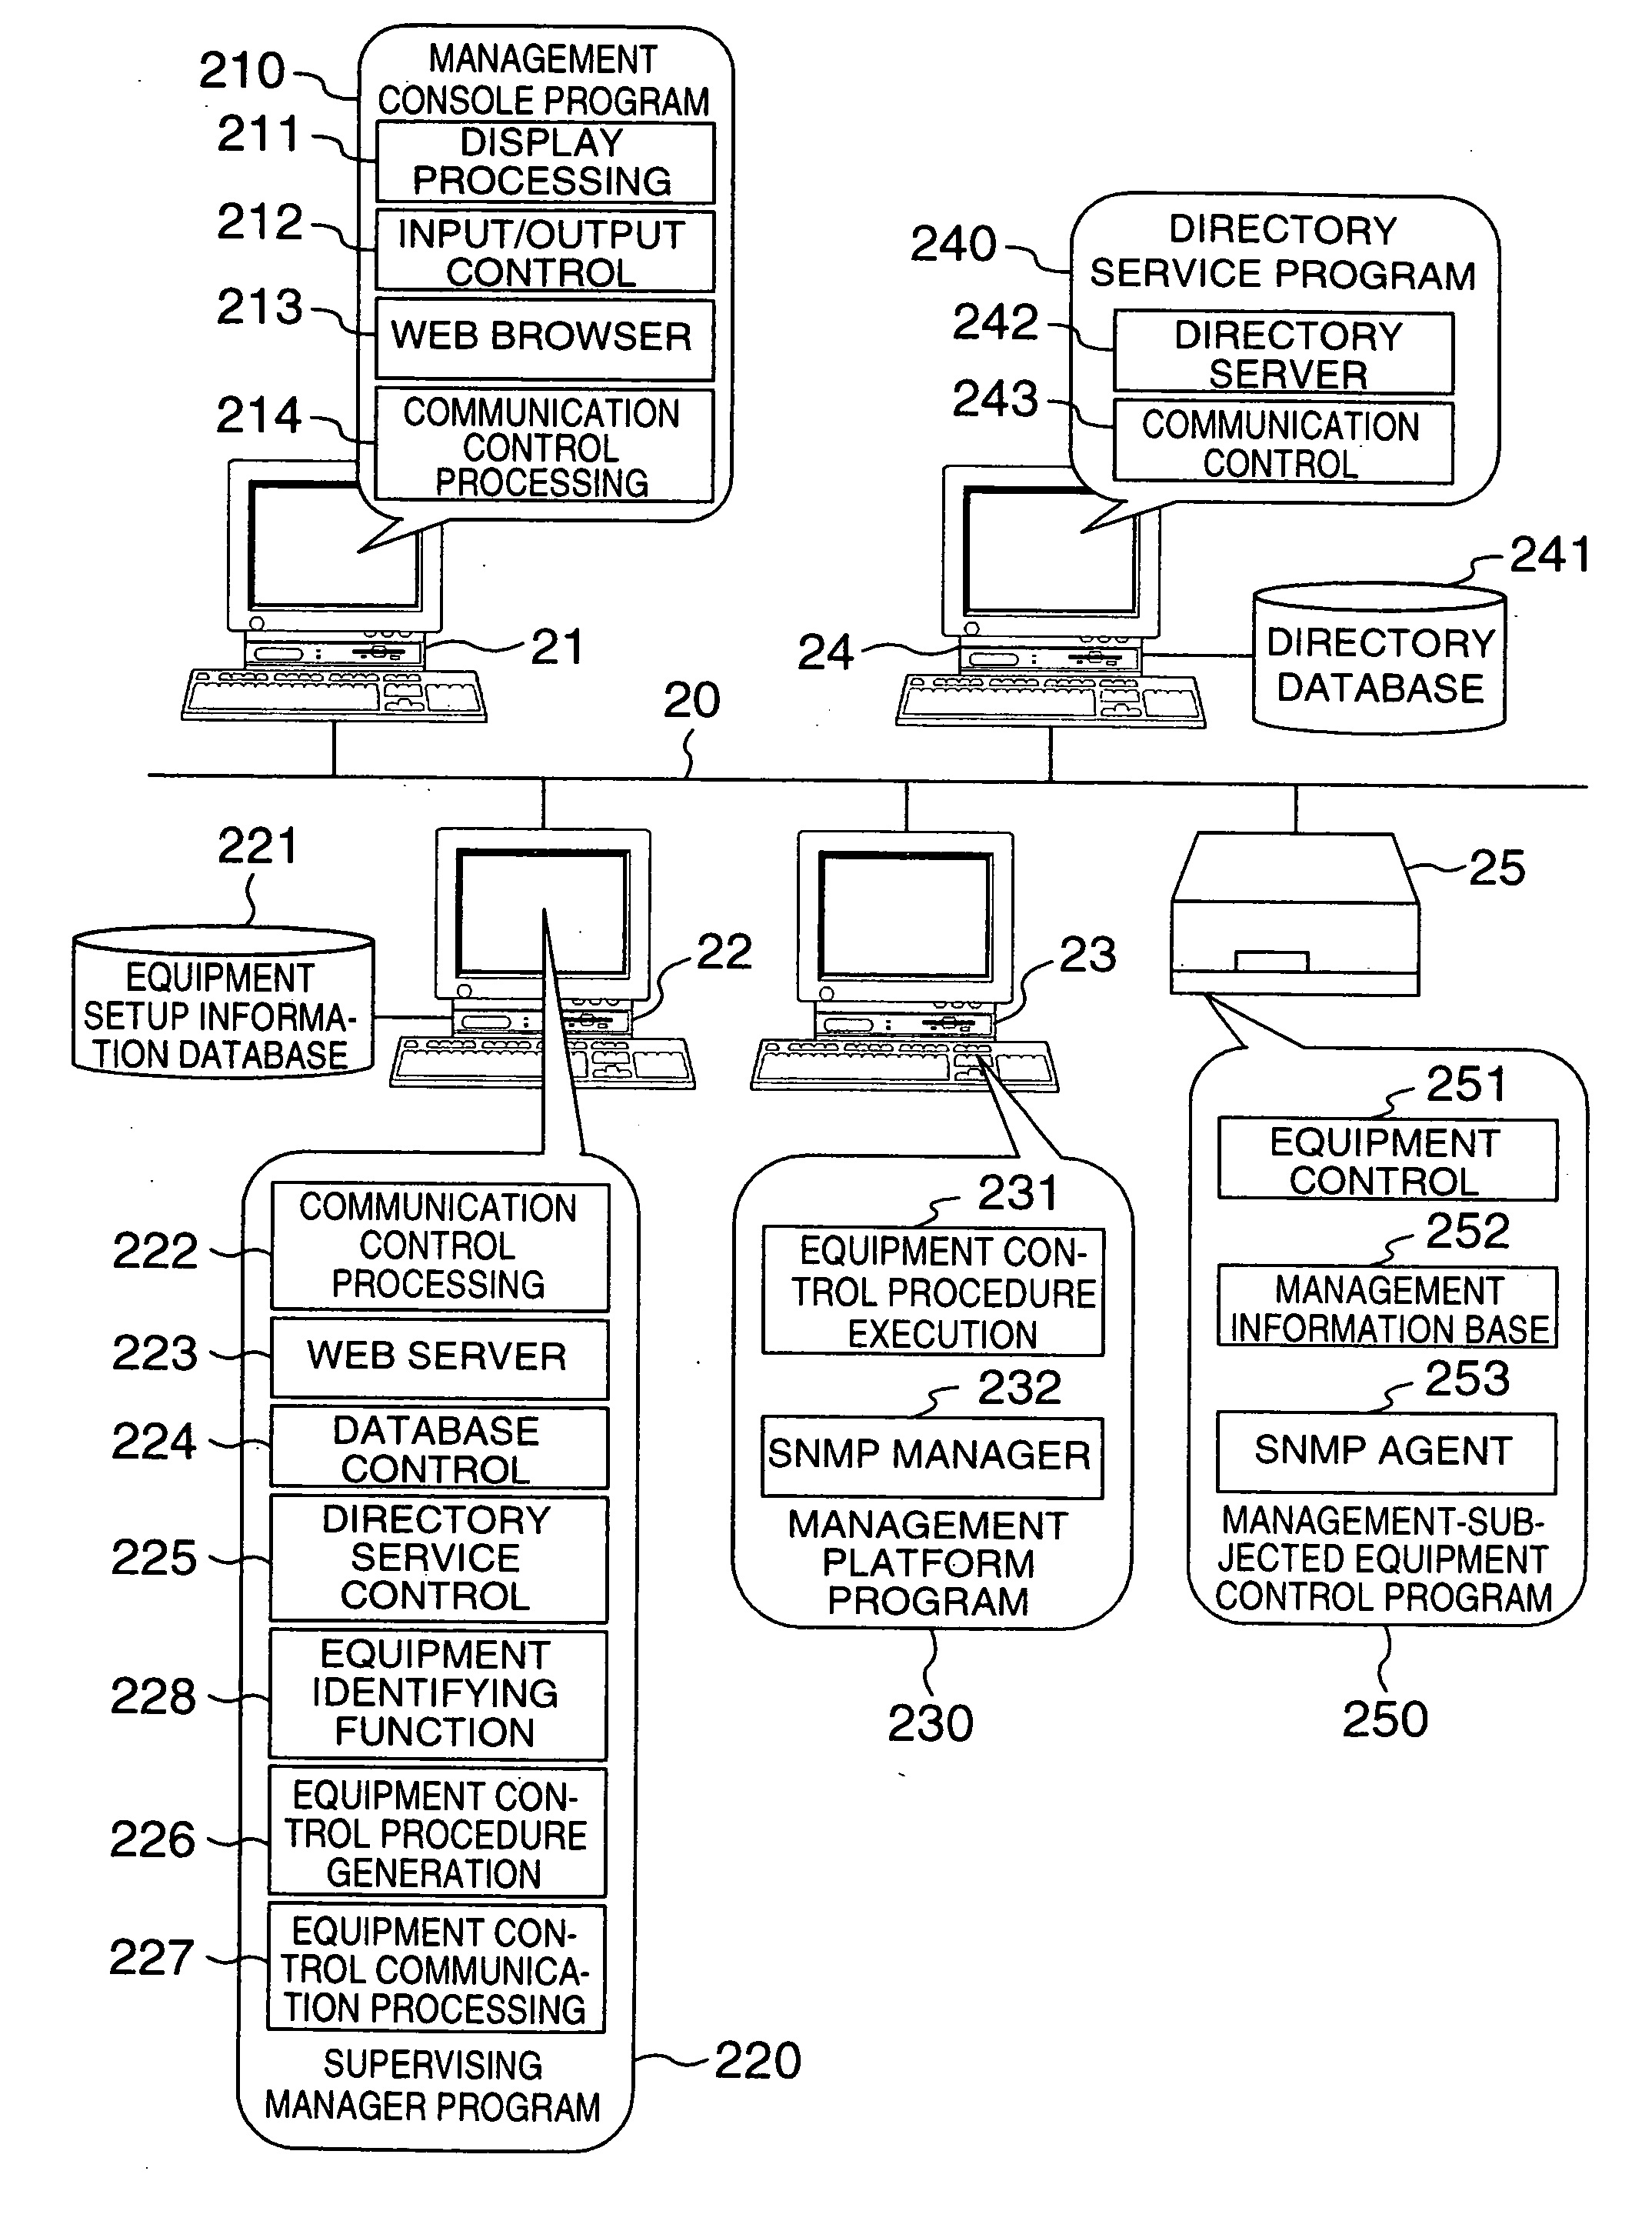 Network management system having a network including virtual networks